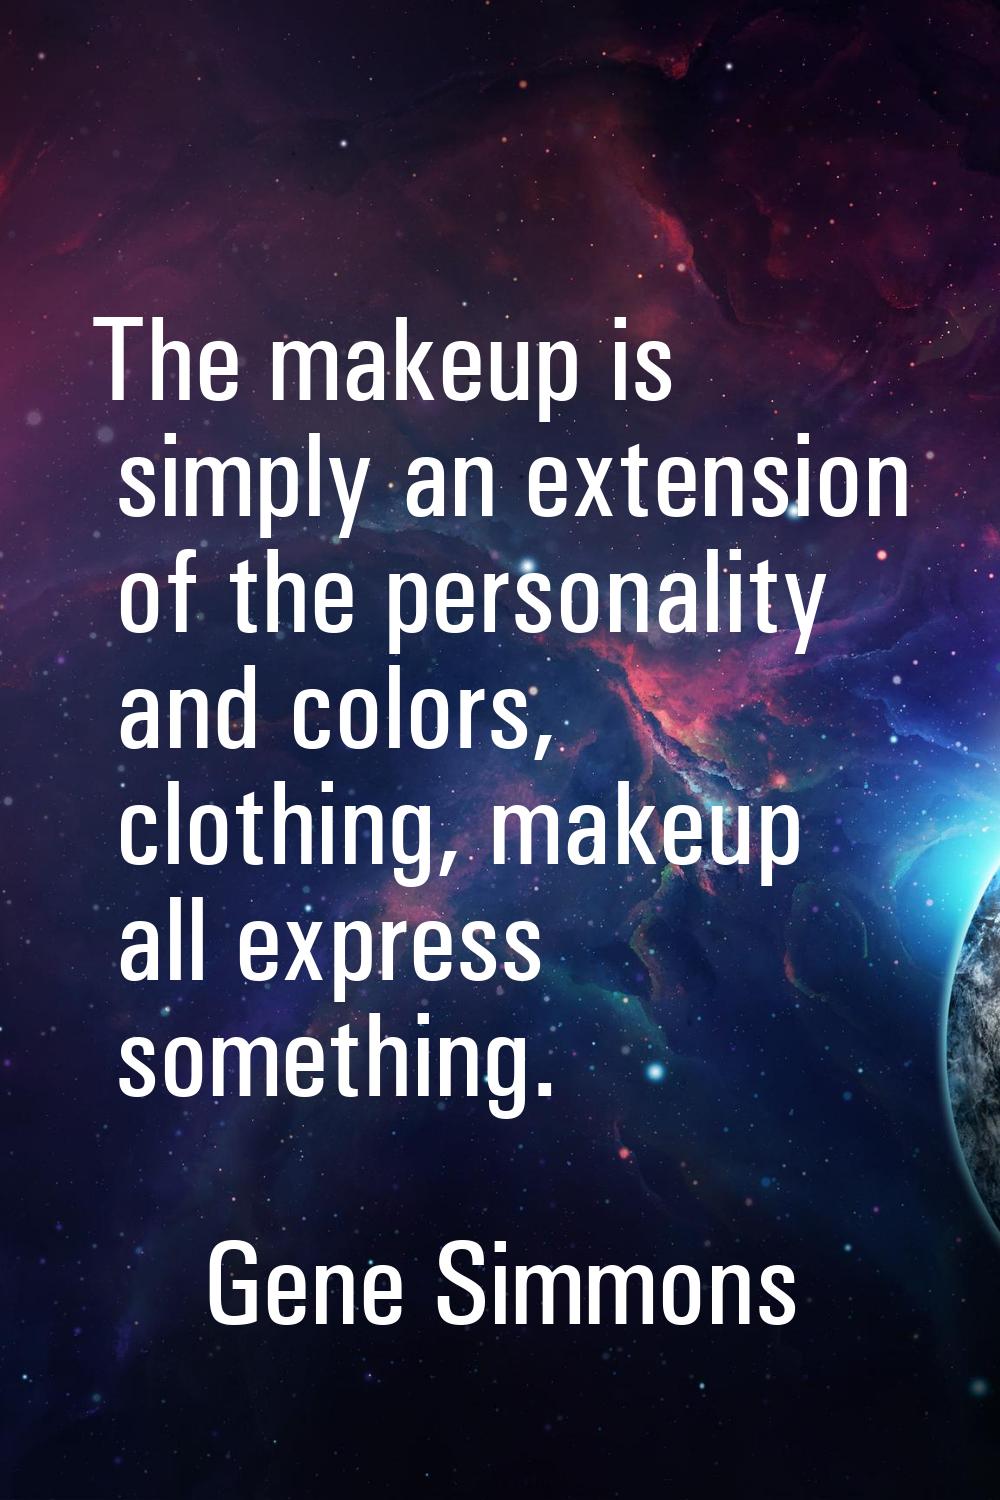 The makeup is simply an extension of the personality and colors, clothing, makeup all express somet